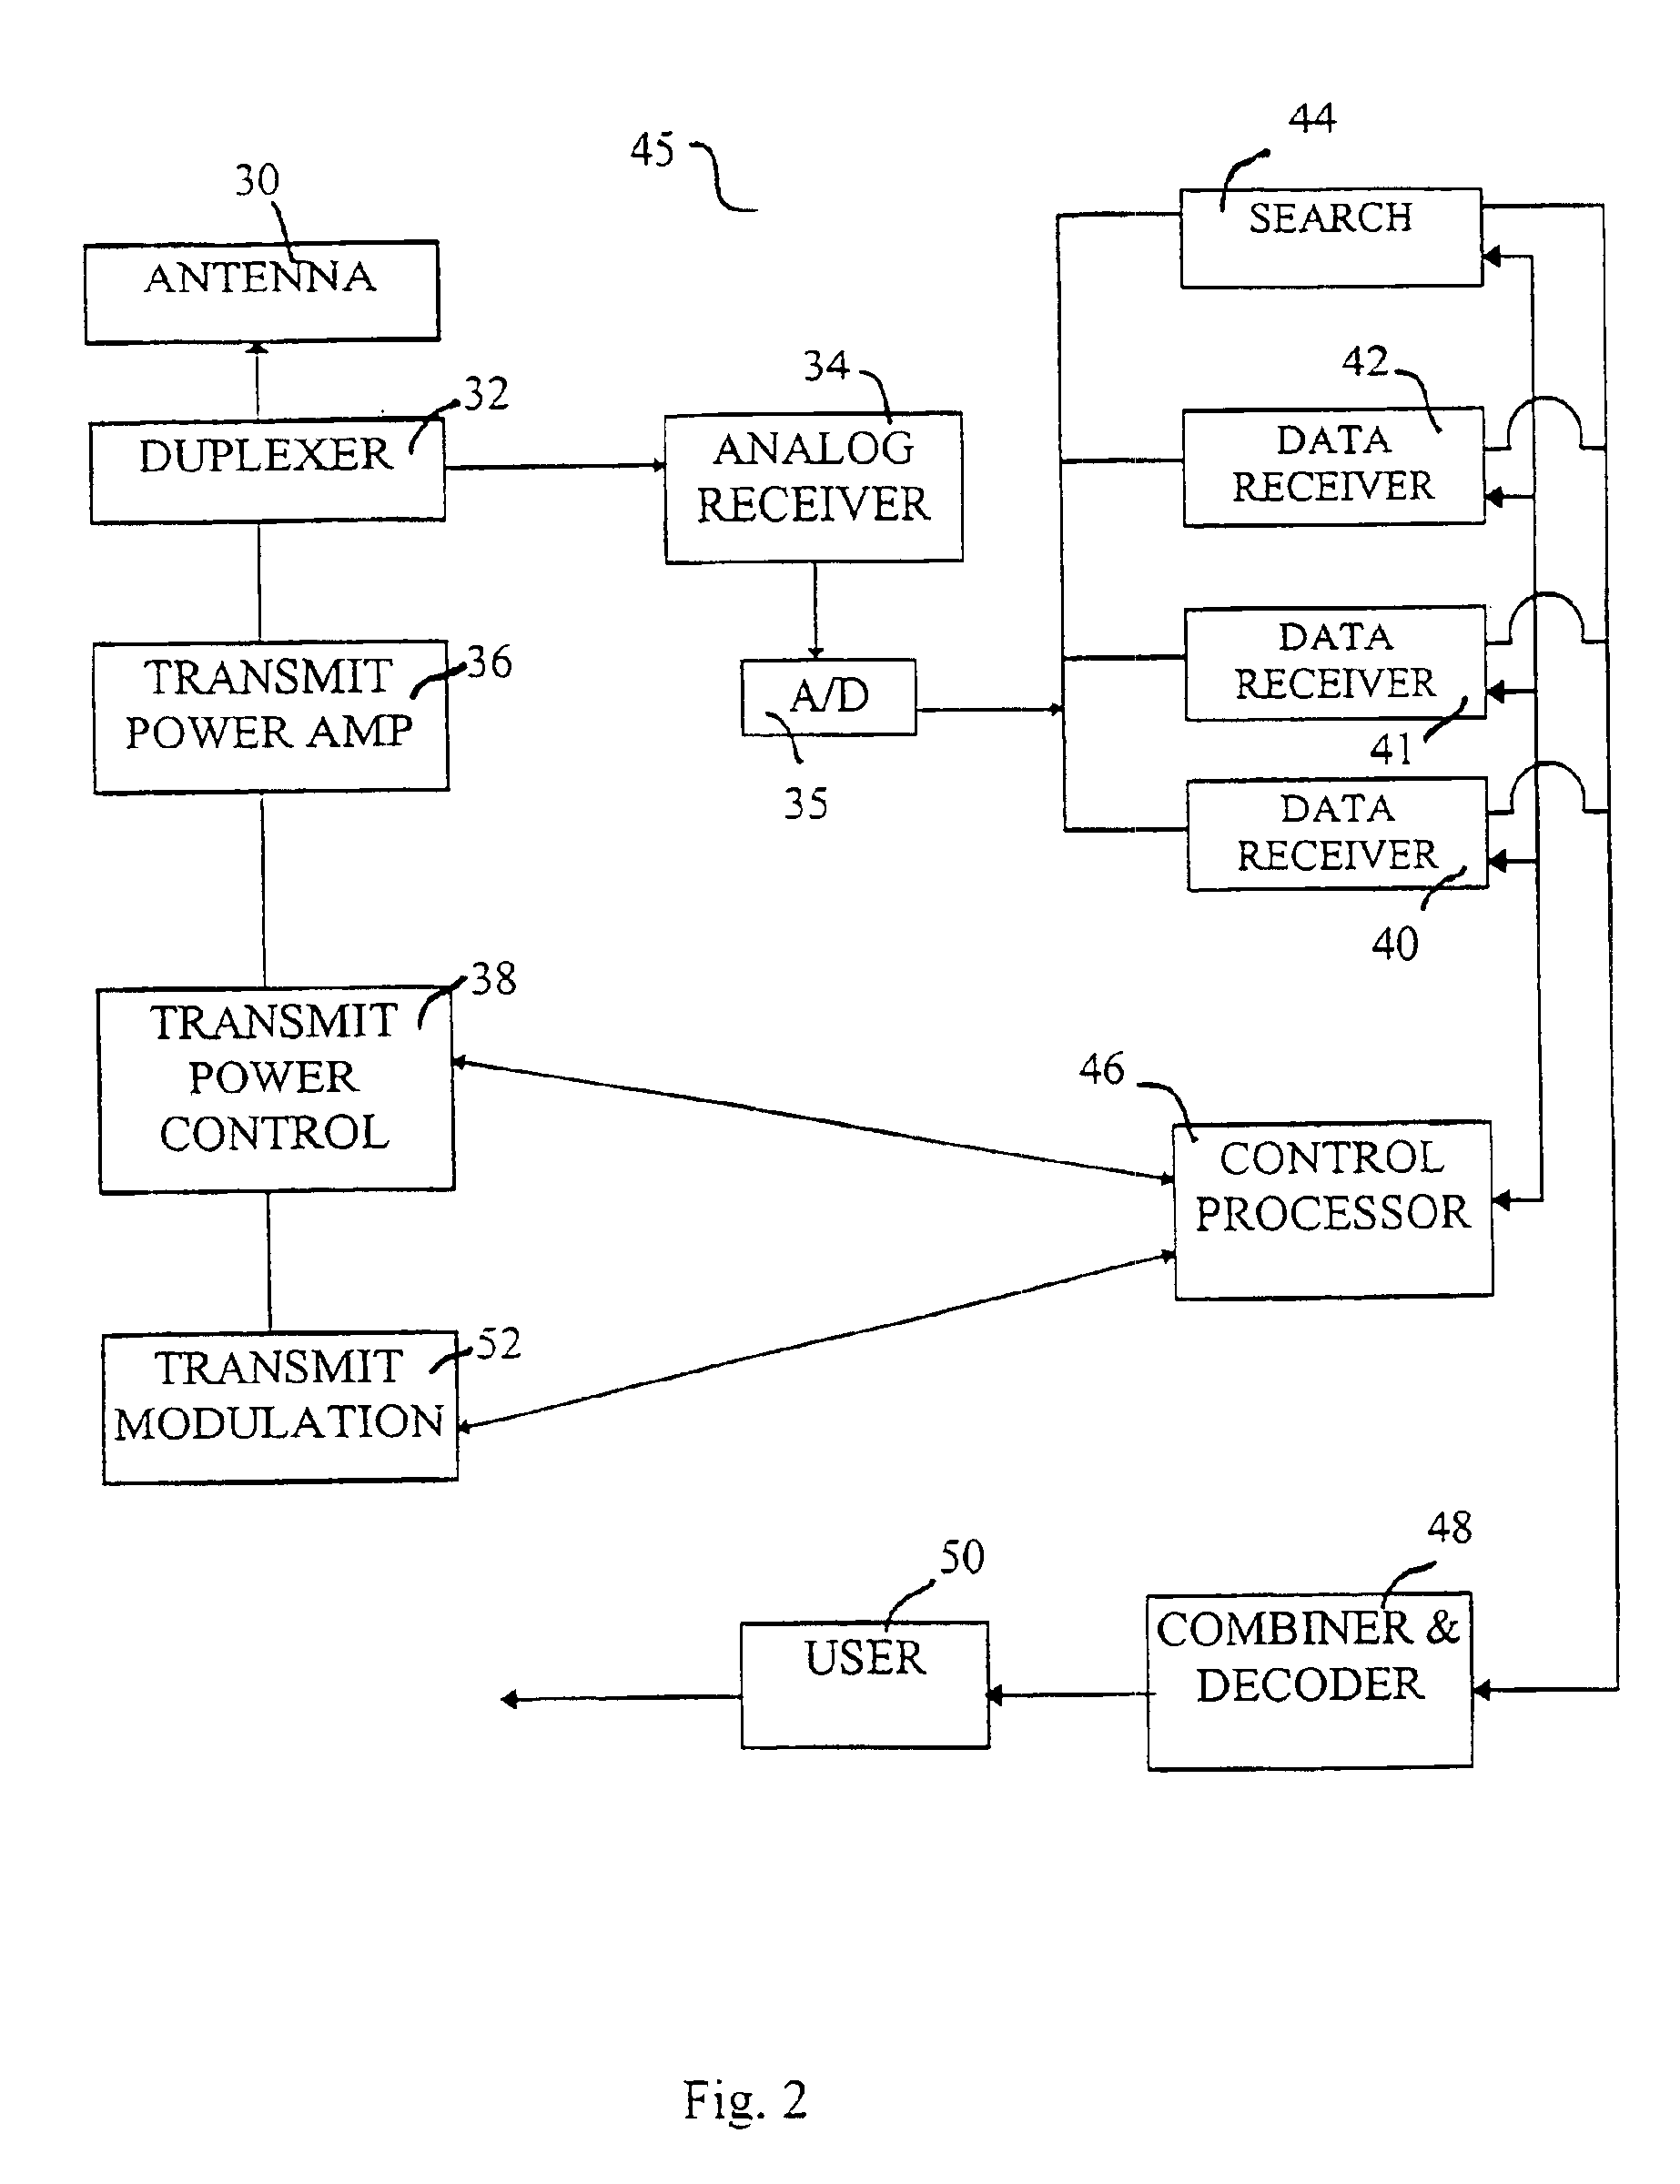 Method and apparatus for providing high quality transmissions in a telecommunications system